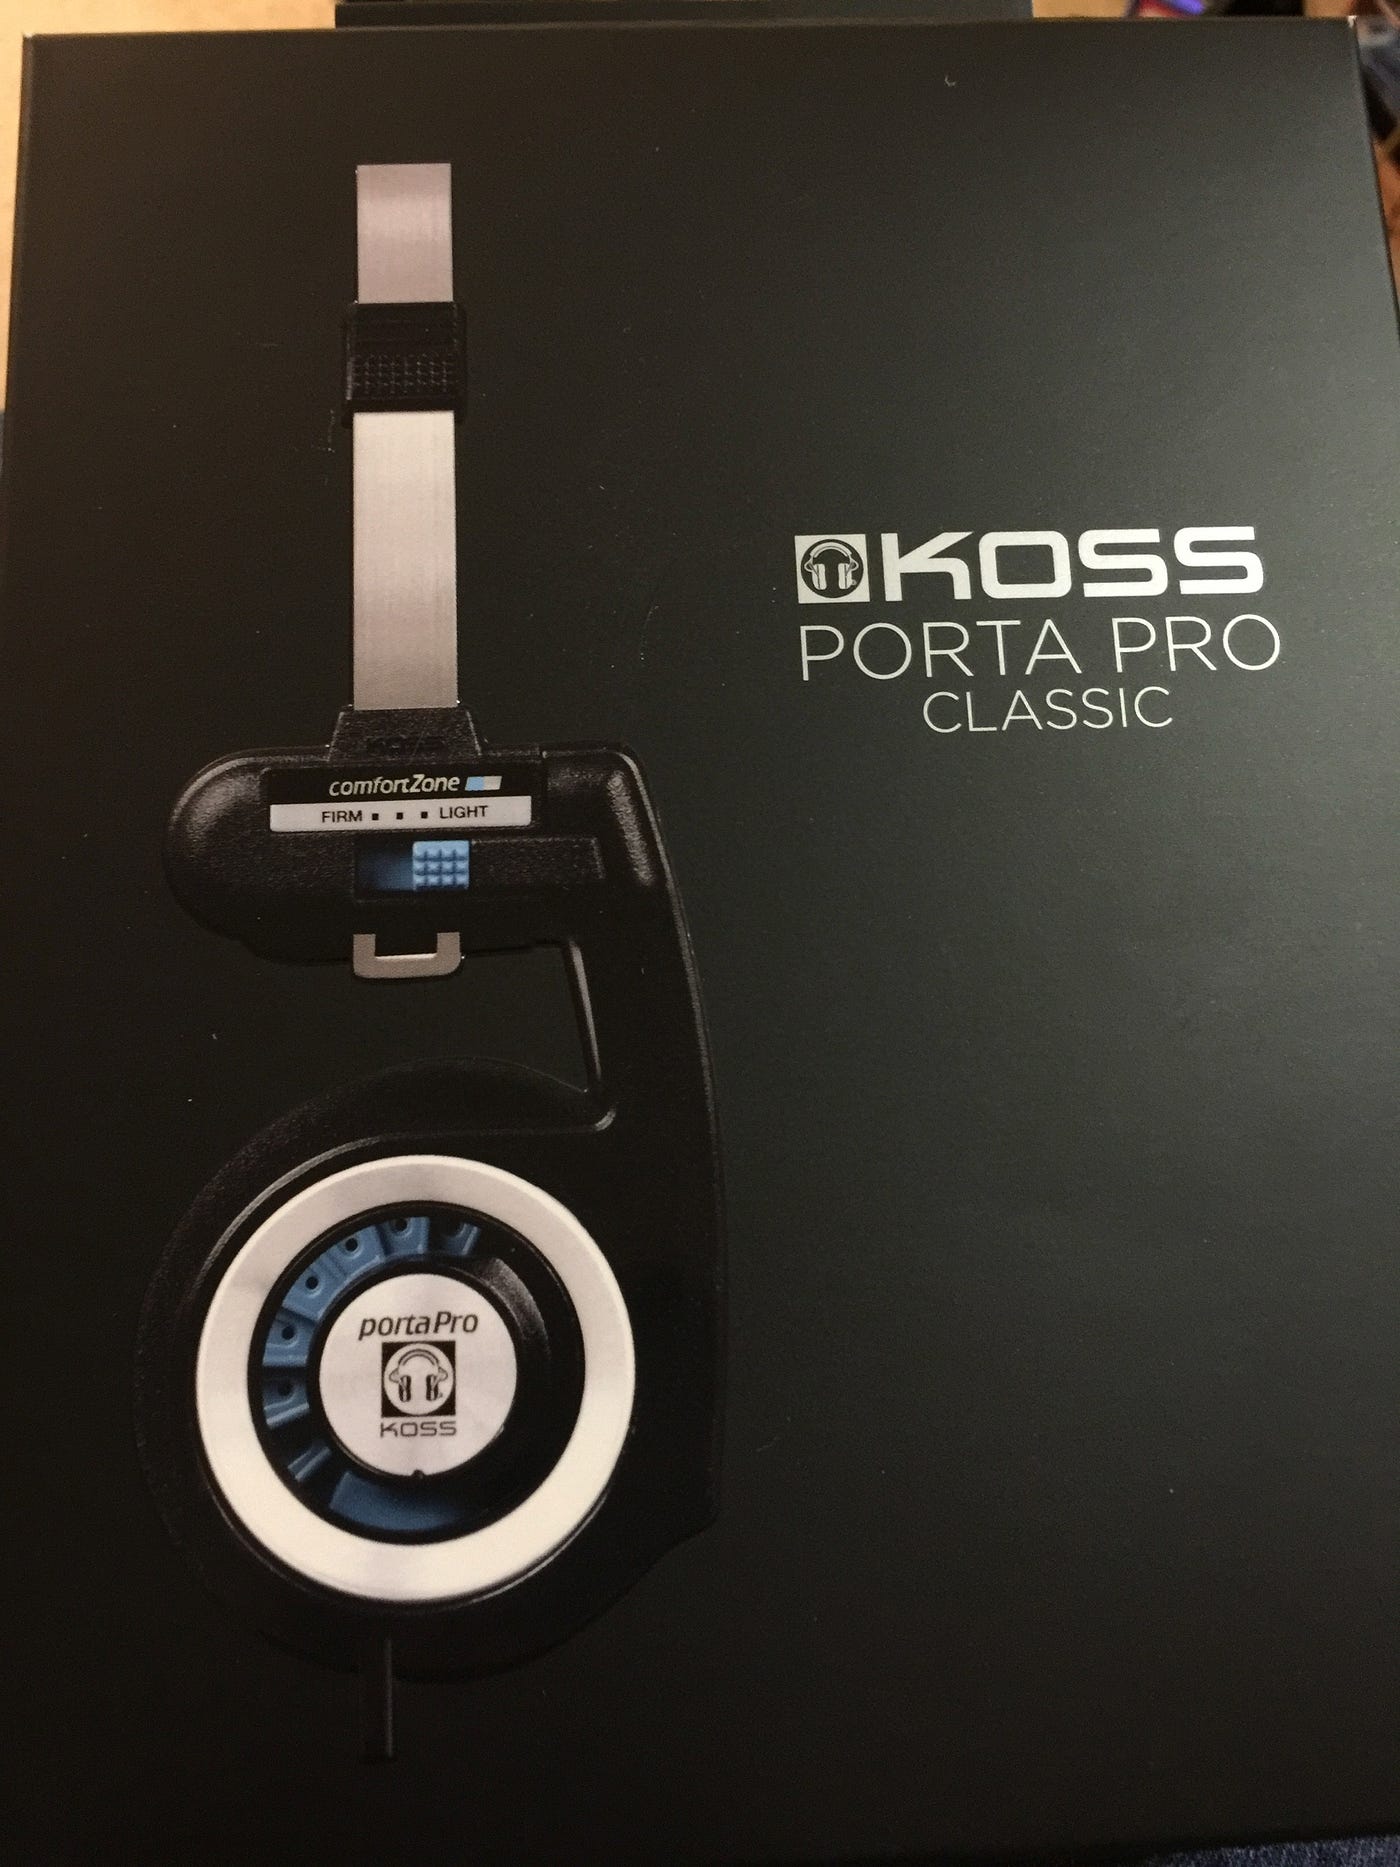 Koss Porta Pro Is Now Even More Affordable After This Sweet